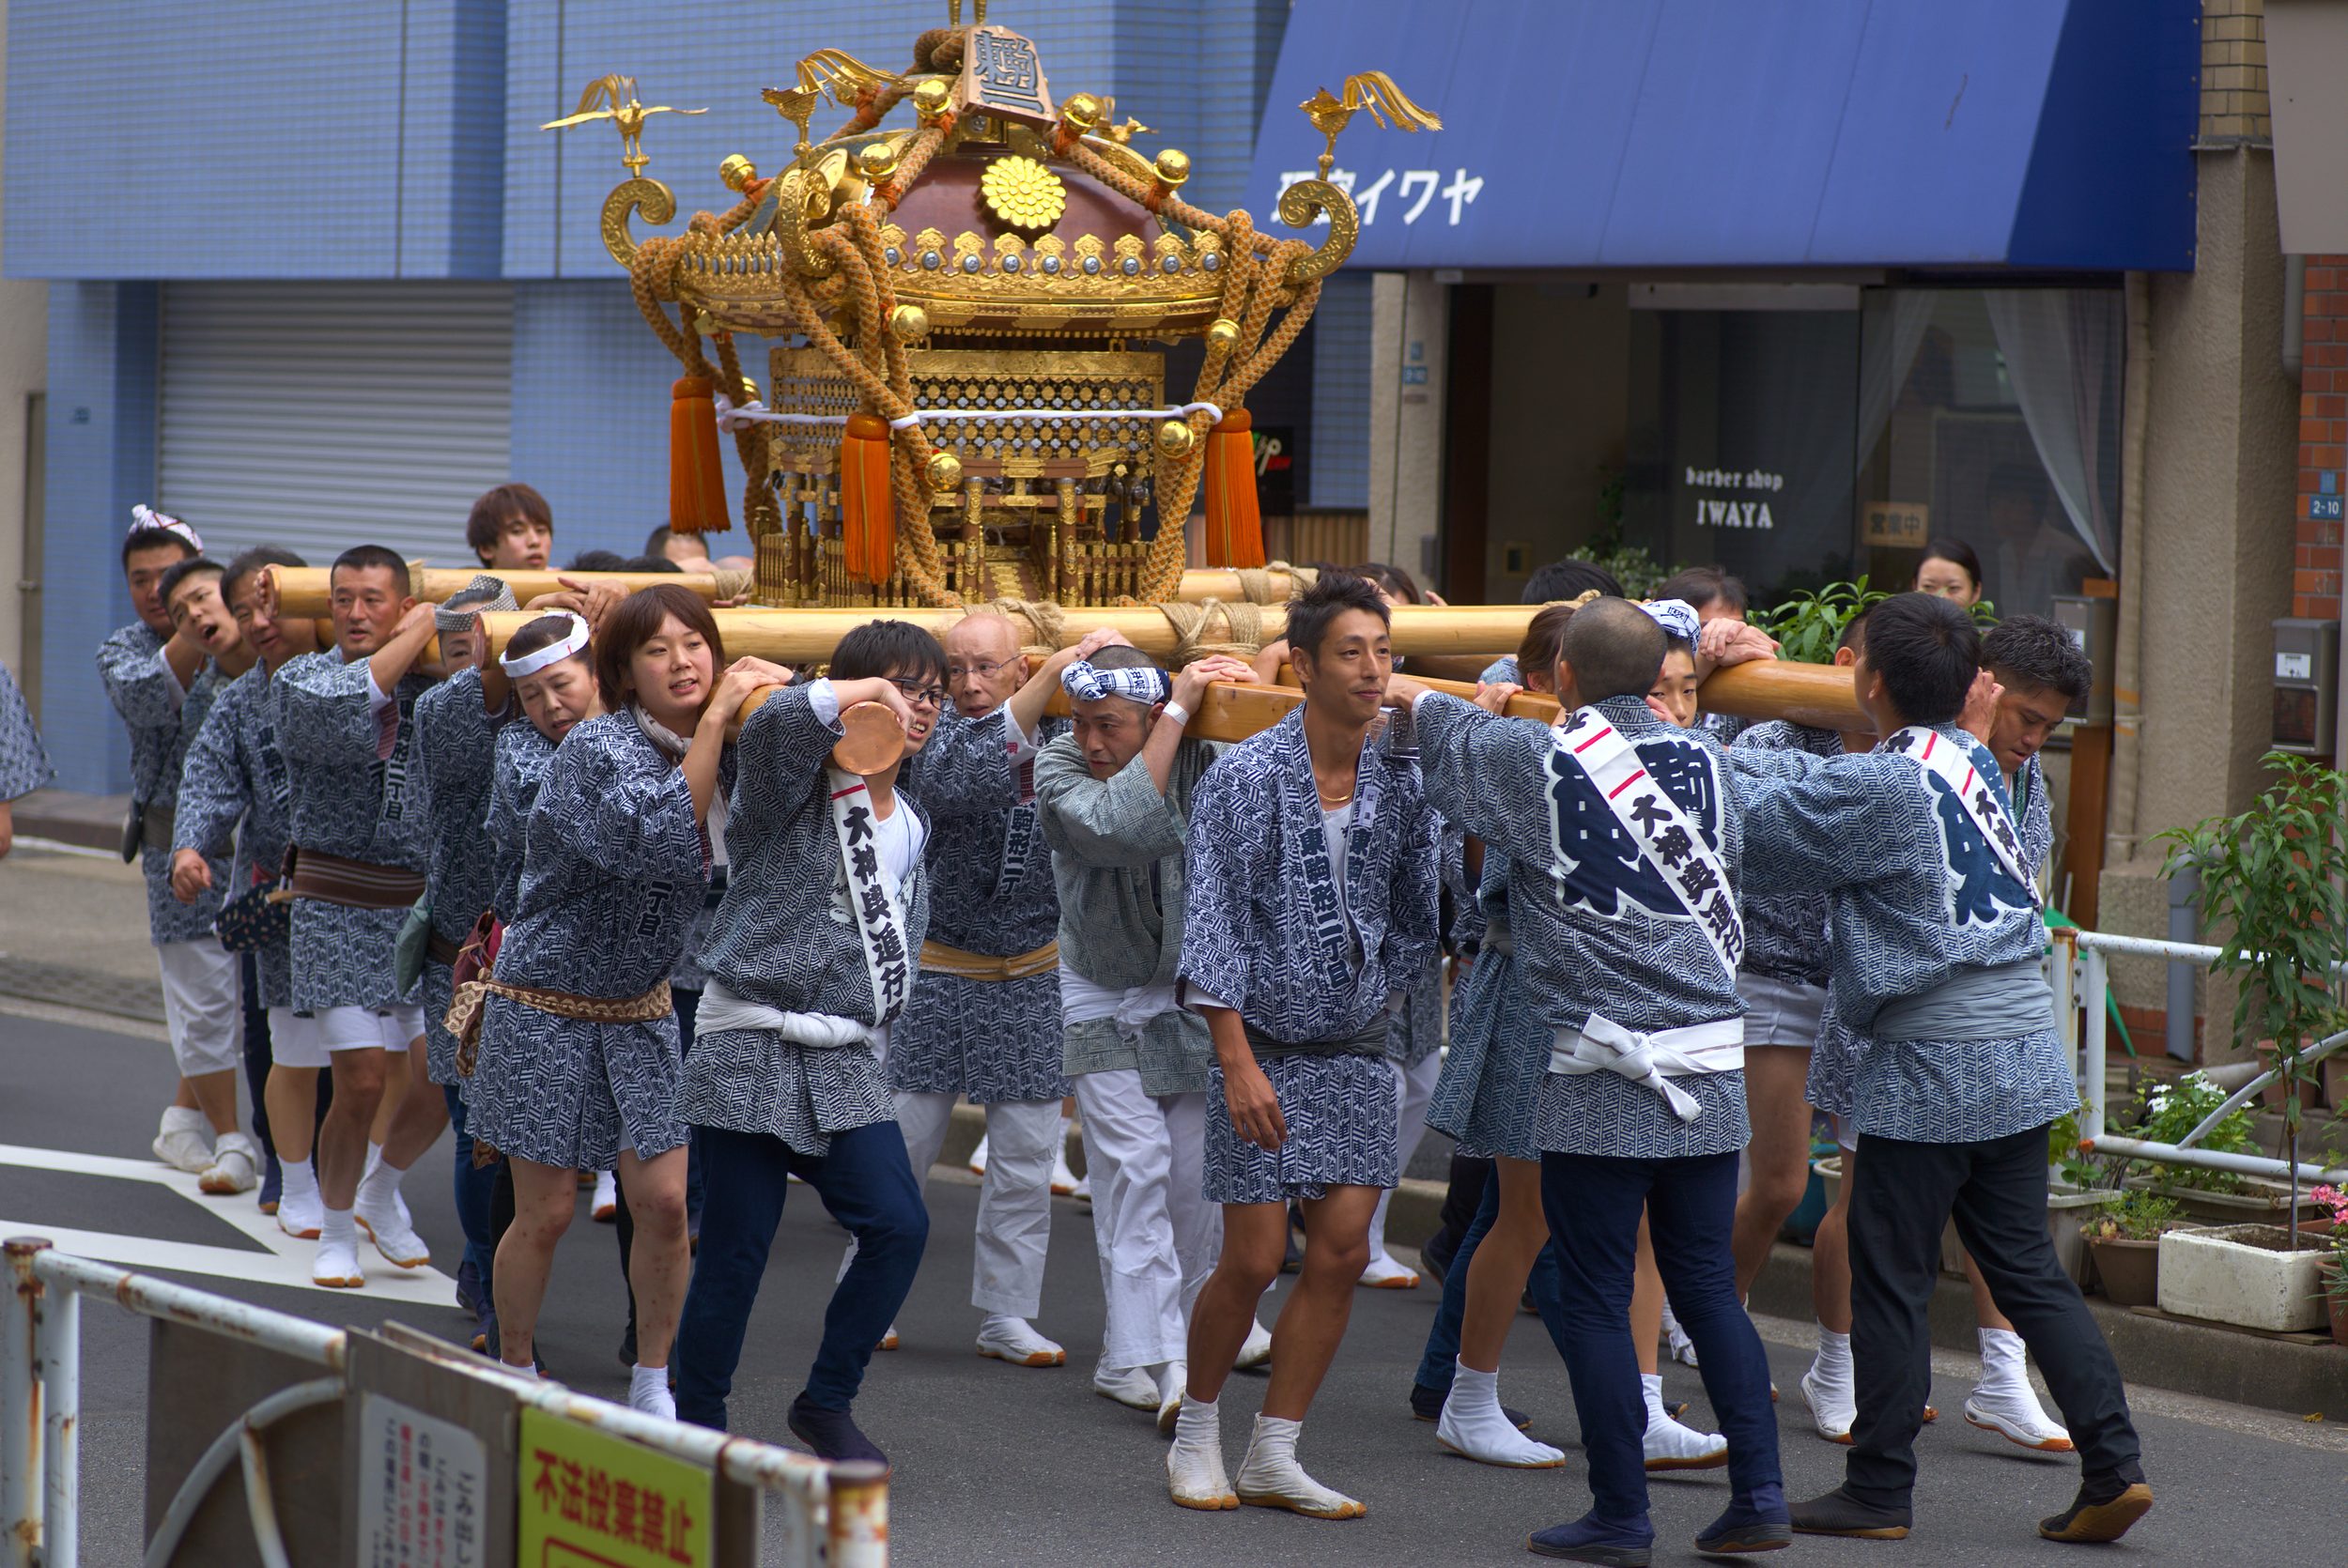 25 young people corrying a mikoshi and chanting